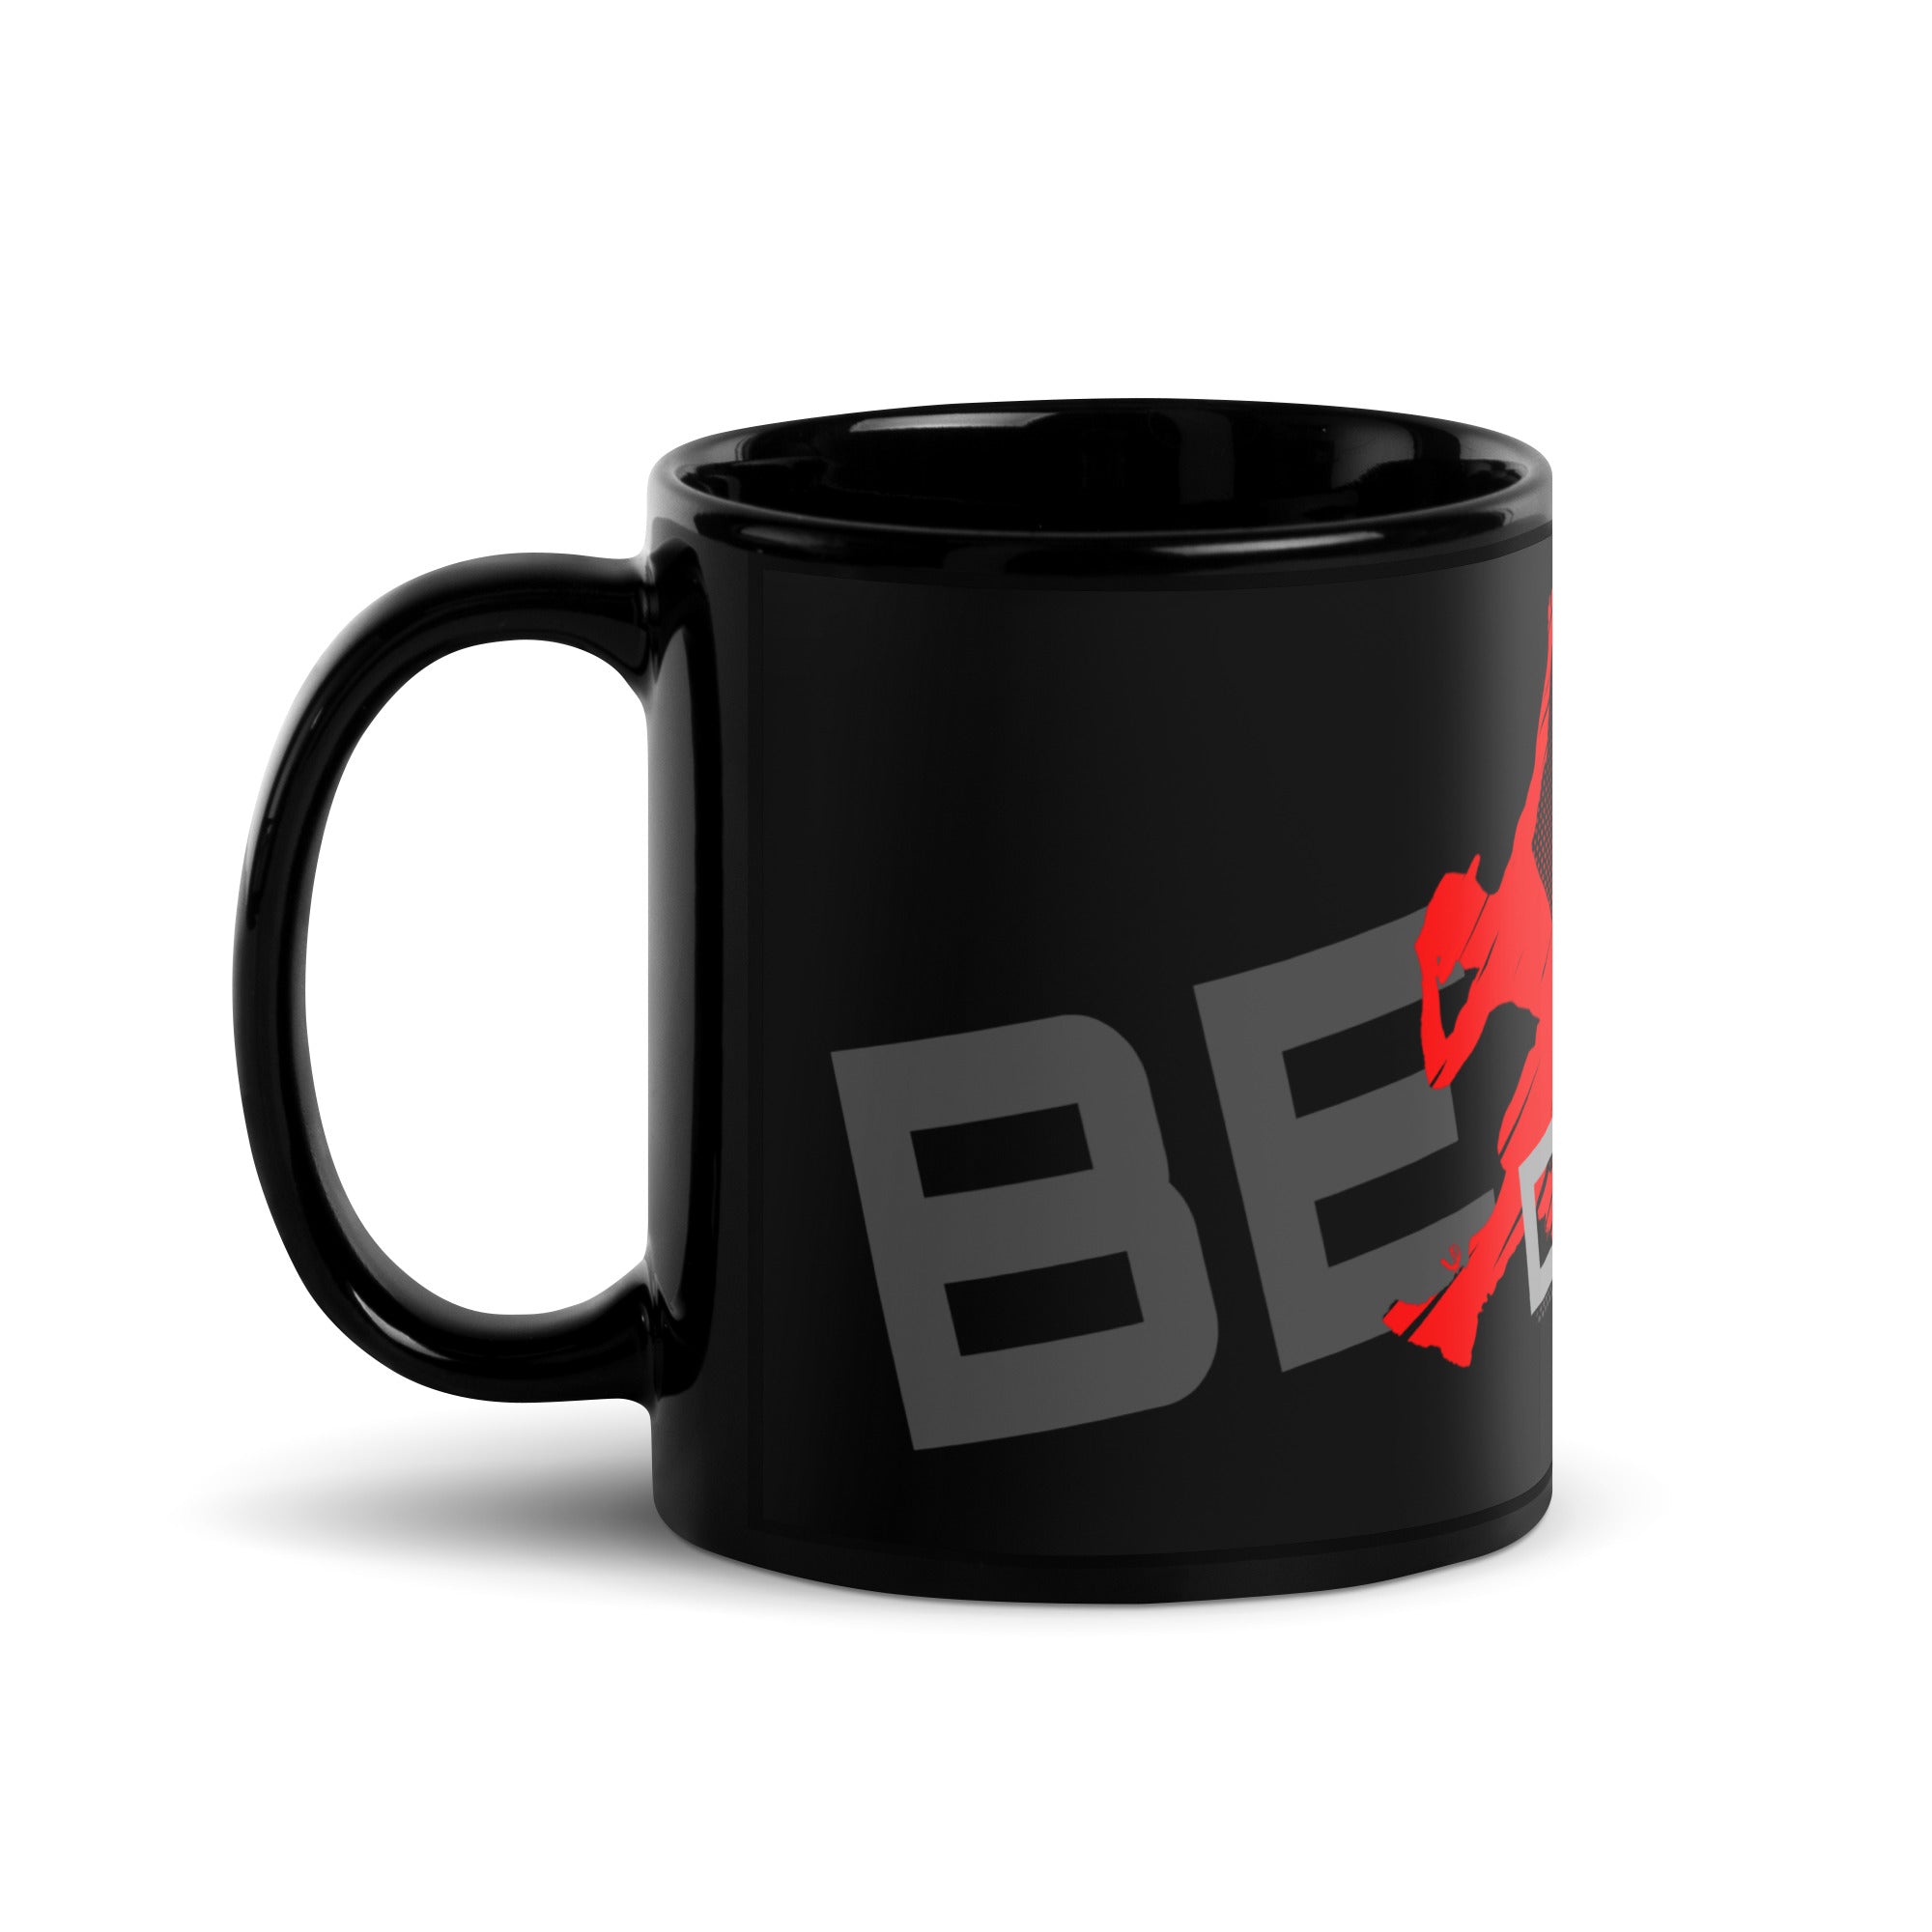 Why To Be Normal? BE DANCER - Black Glossy Mug for TRUE Dancers